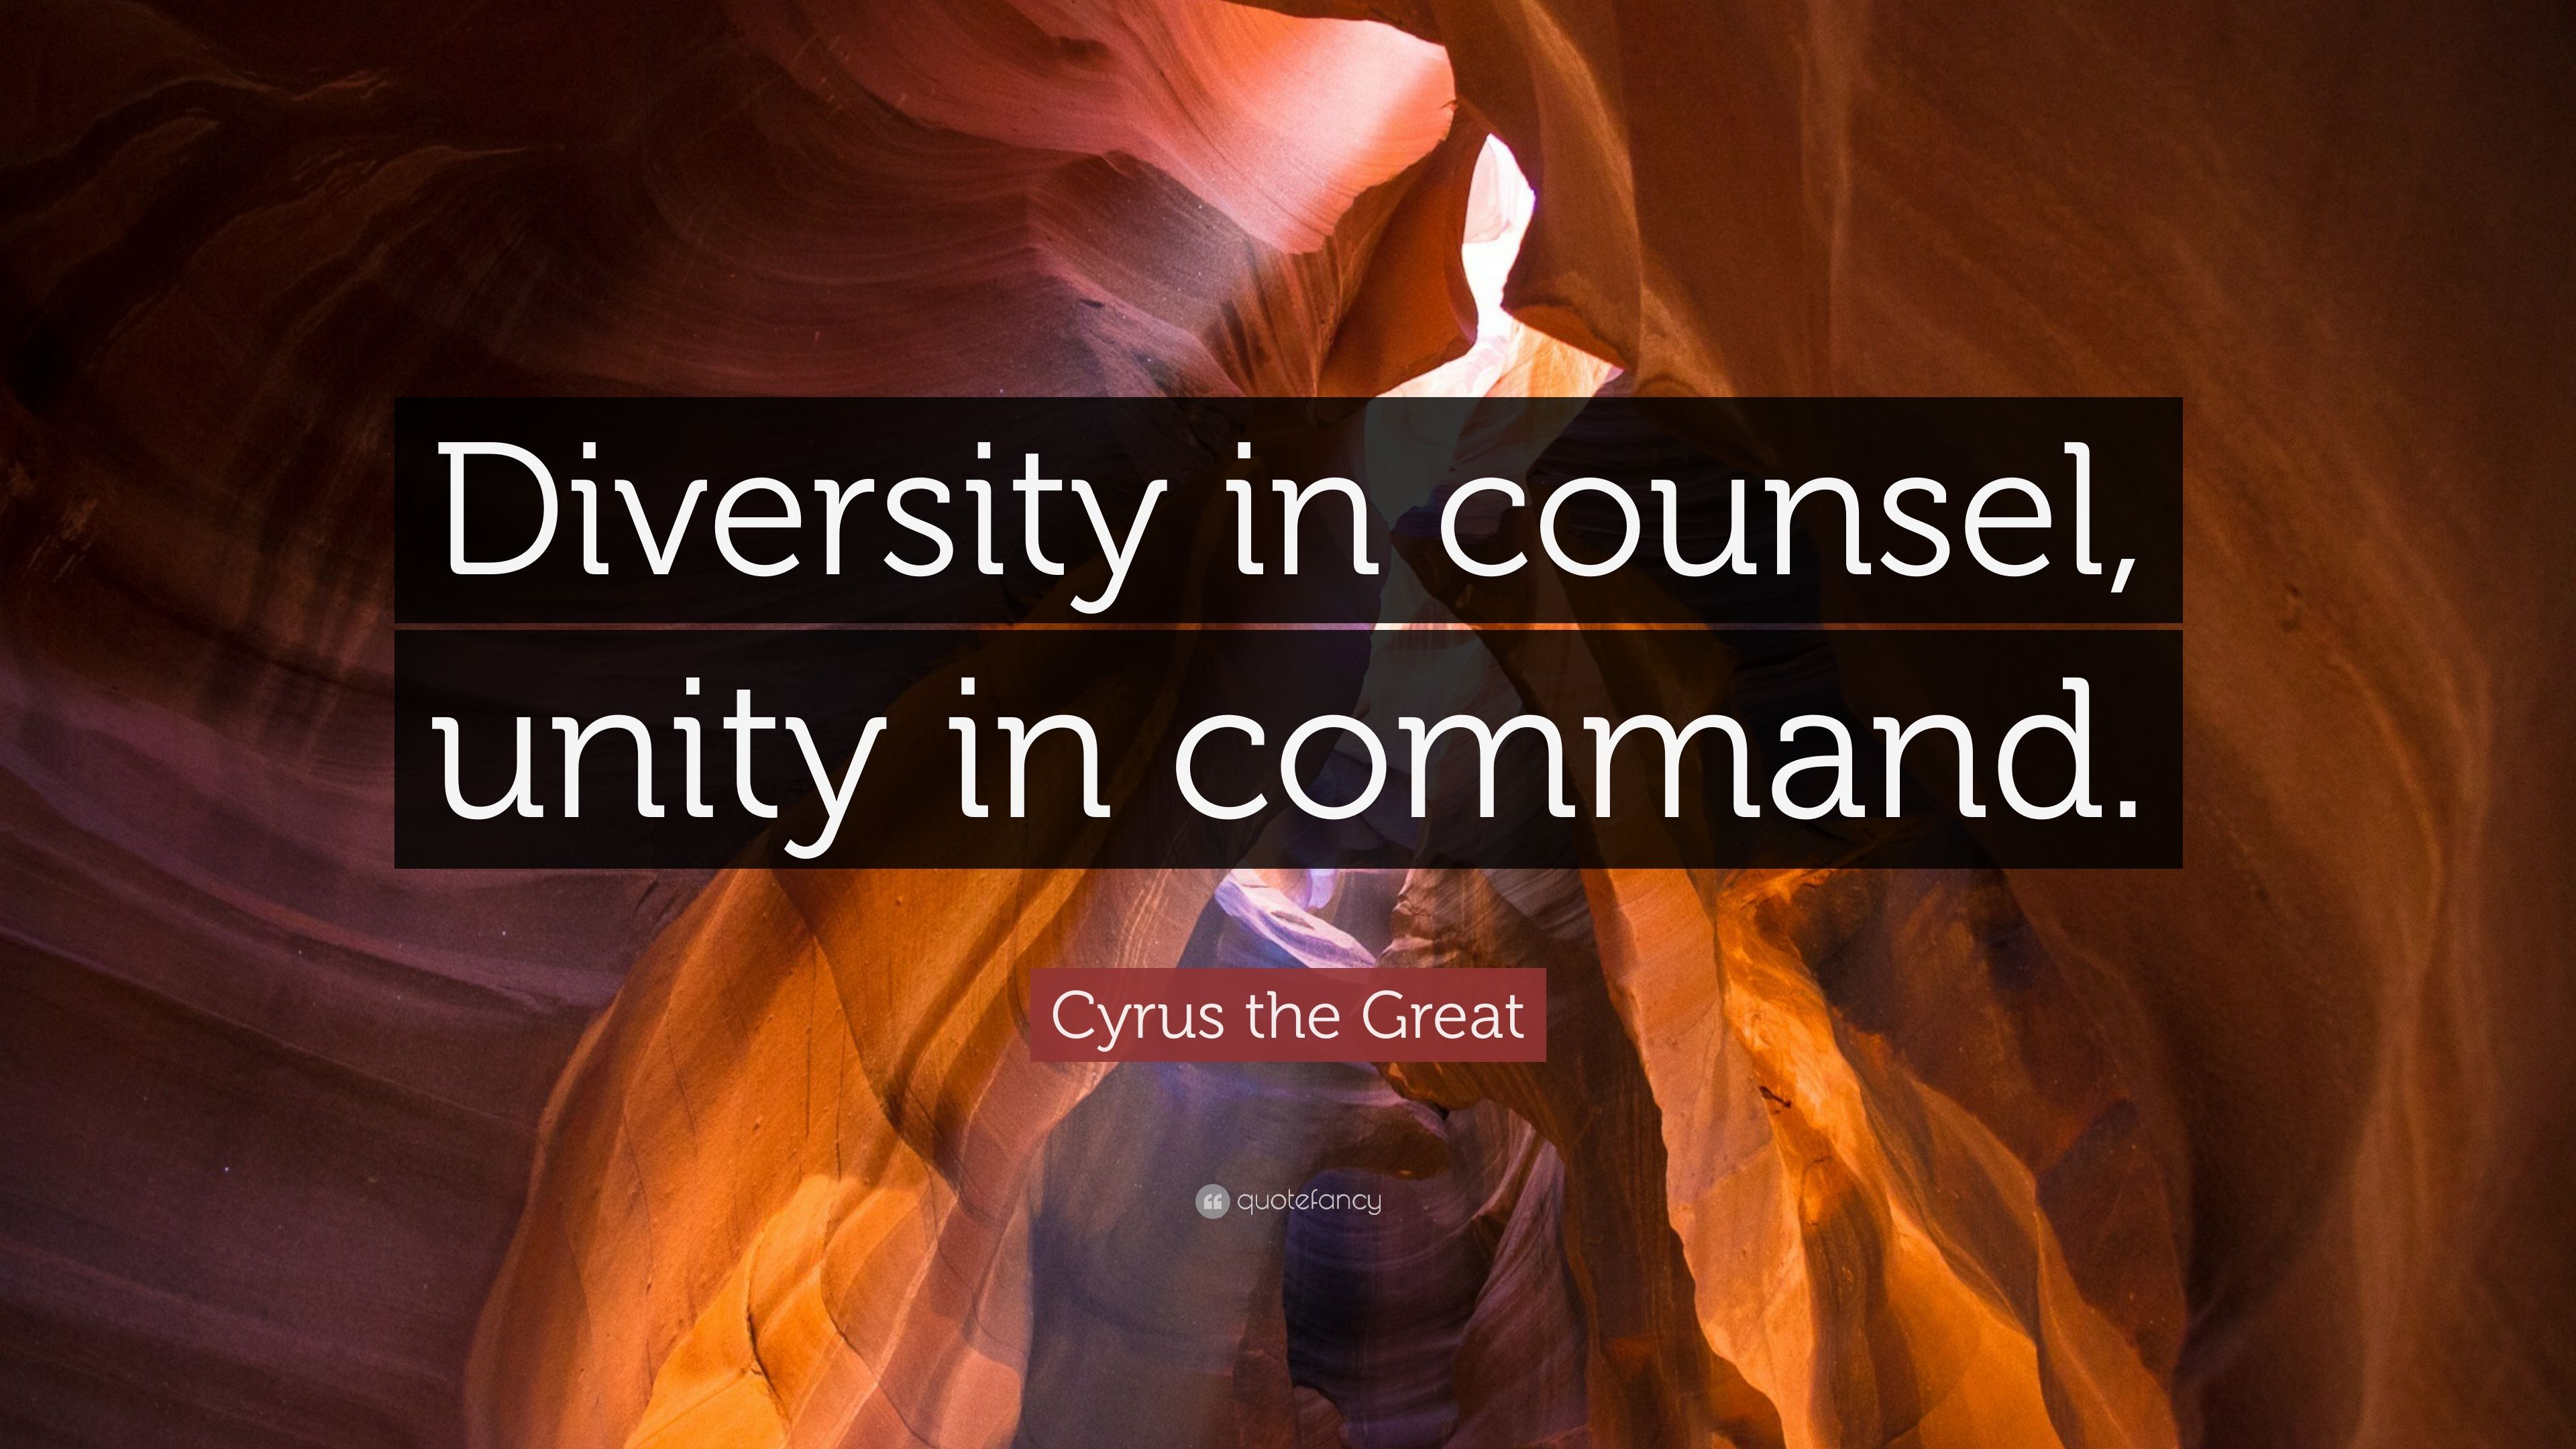 Cyrus the Great Quote: “Diversity in counsel, unity in command